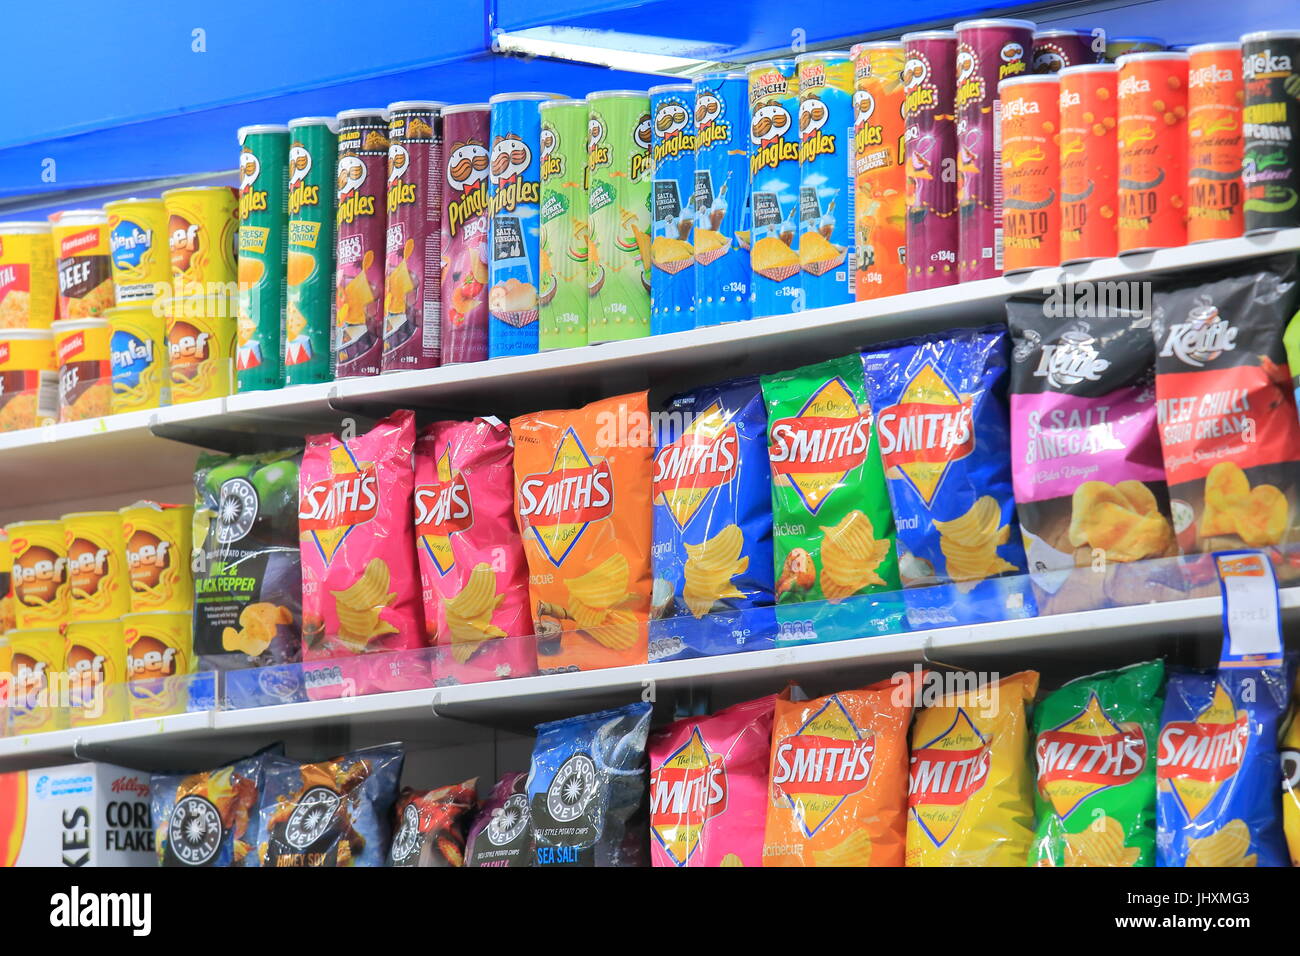 Snacks And Crisps Sold At A Convenience Store In Melbourne Australia